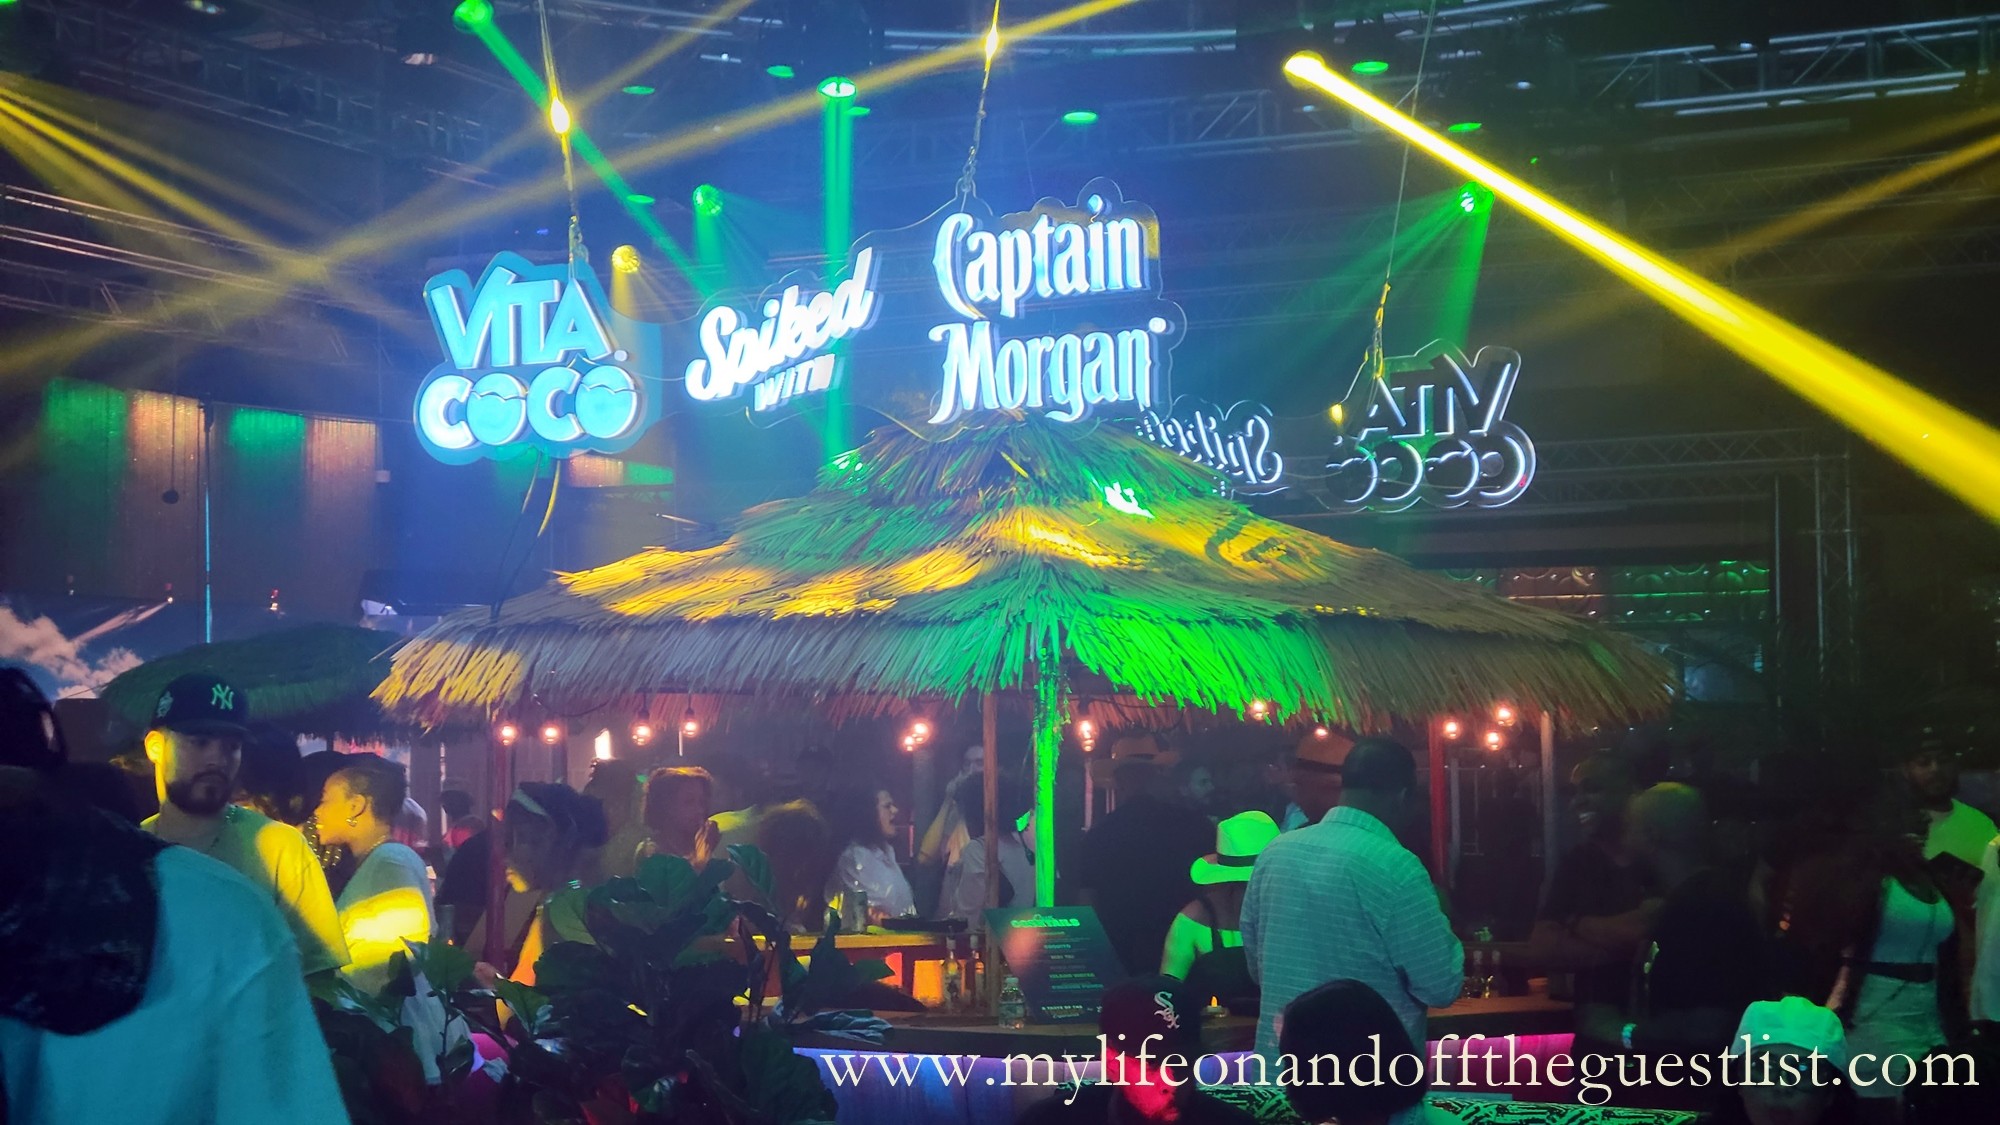 Vita Coco Spiked with Captain Morgan Brings the Tropics to NYC